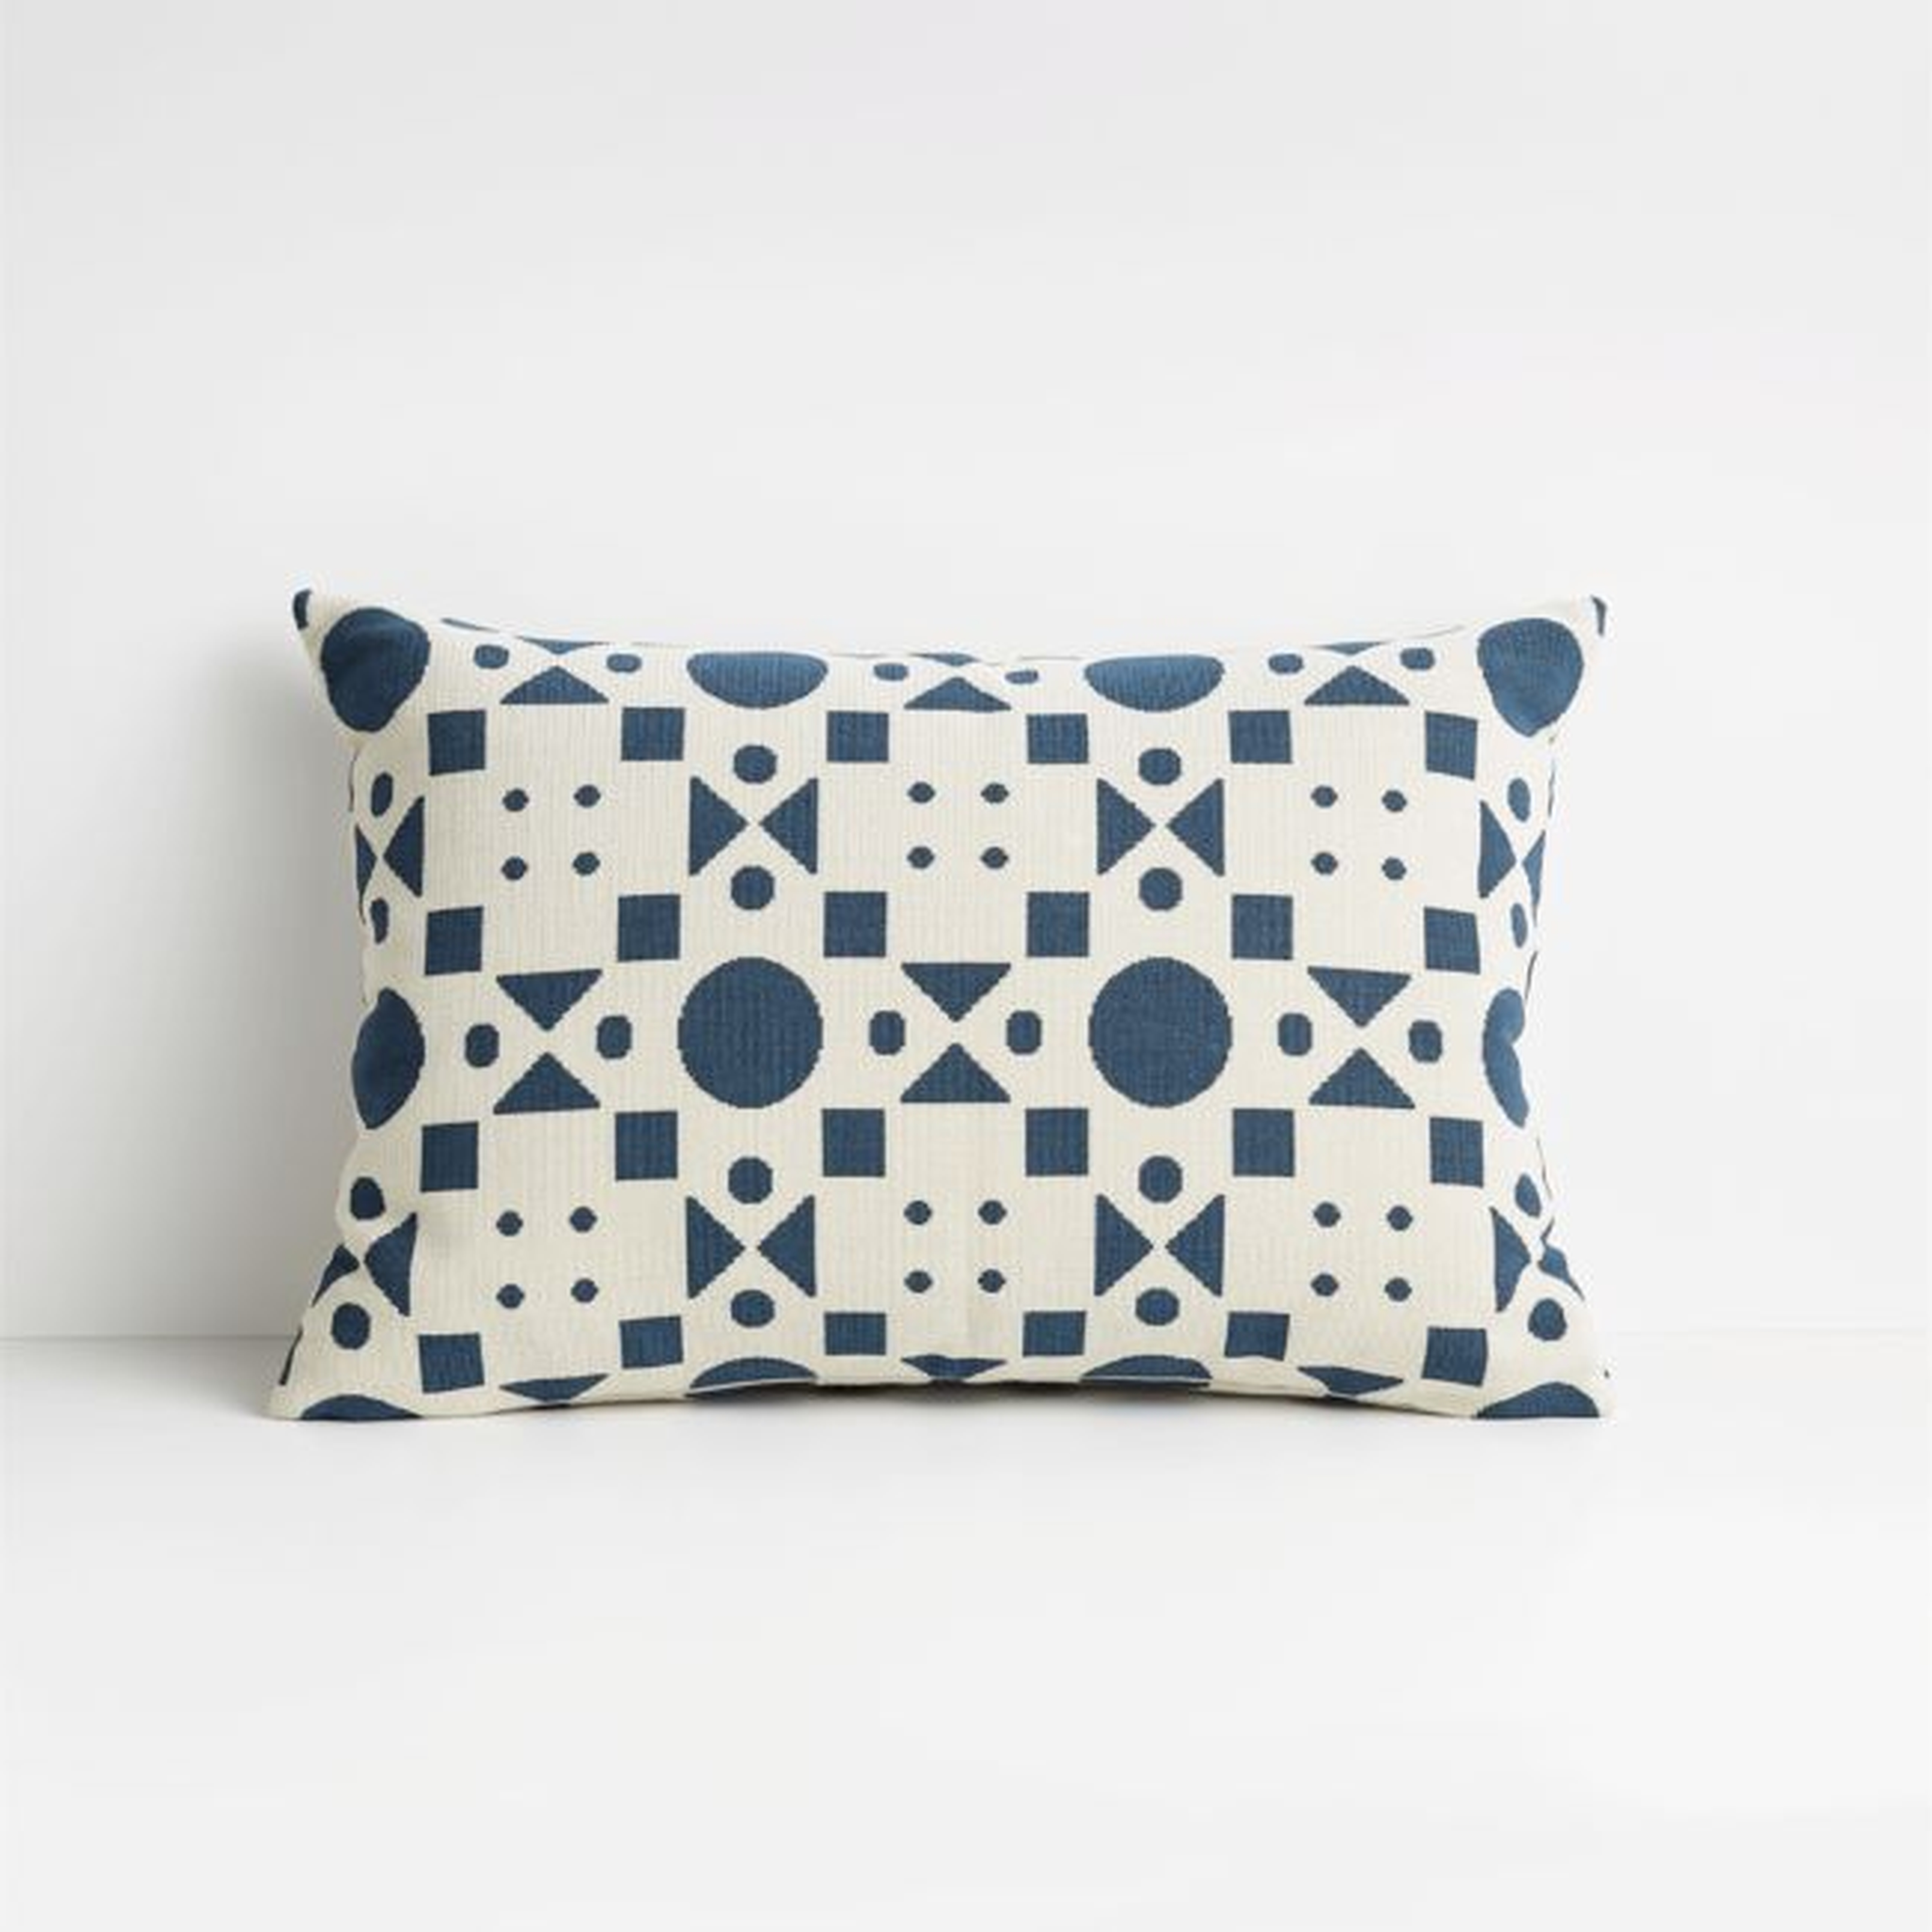 Araati 22"x15" Blue Floral Pillow with Down-Alternative Insert - Crate and Barrel